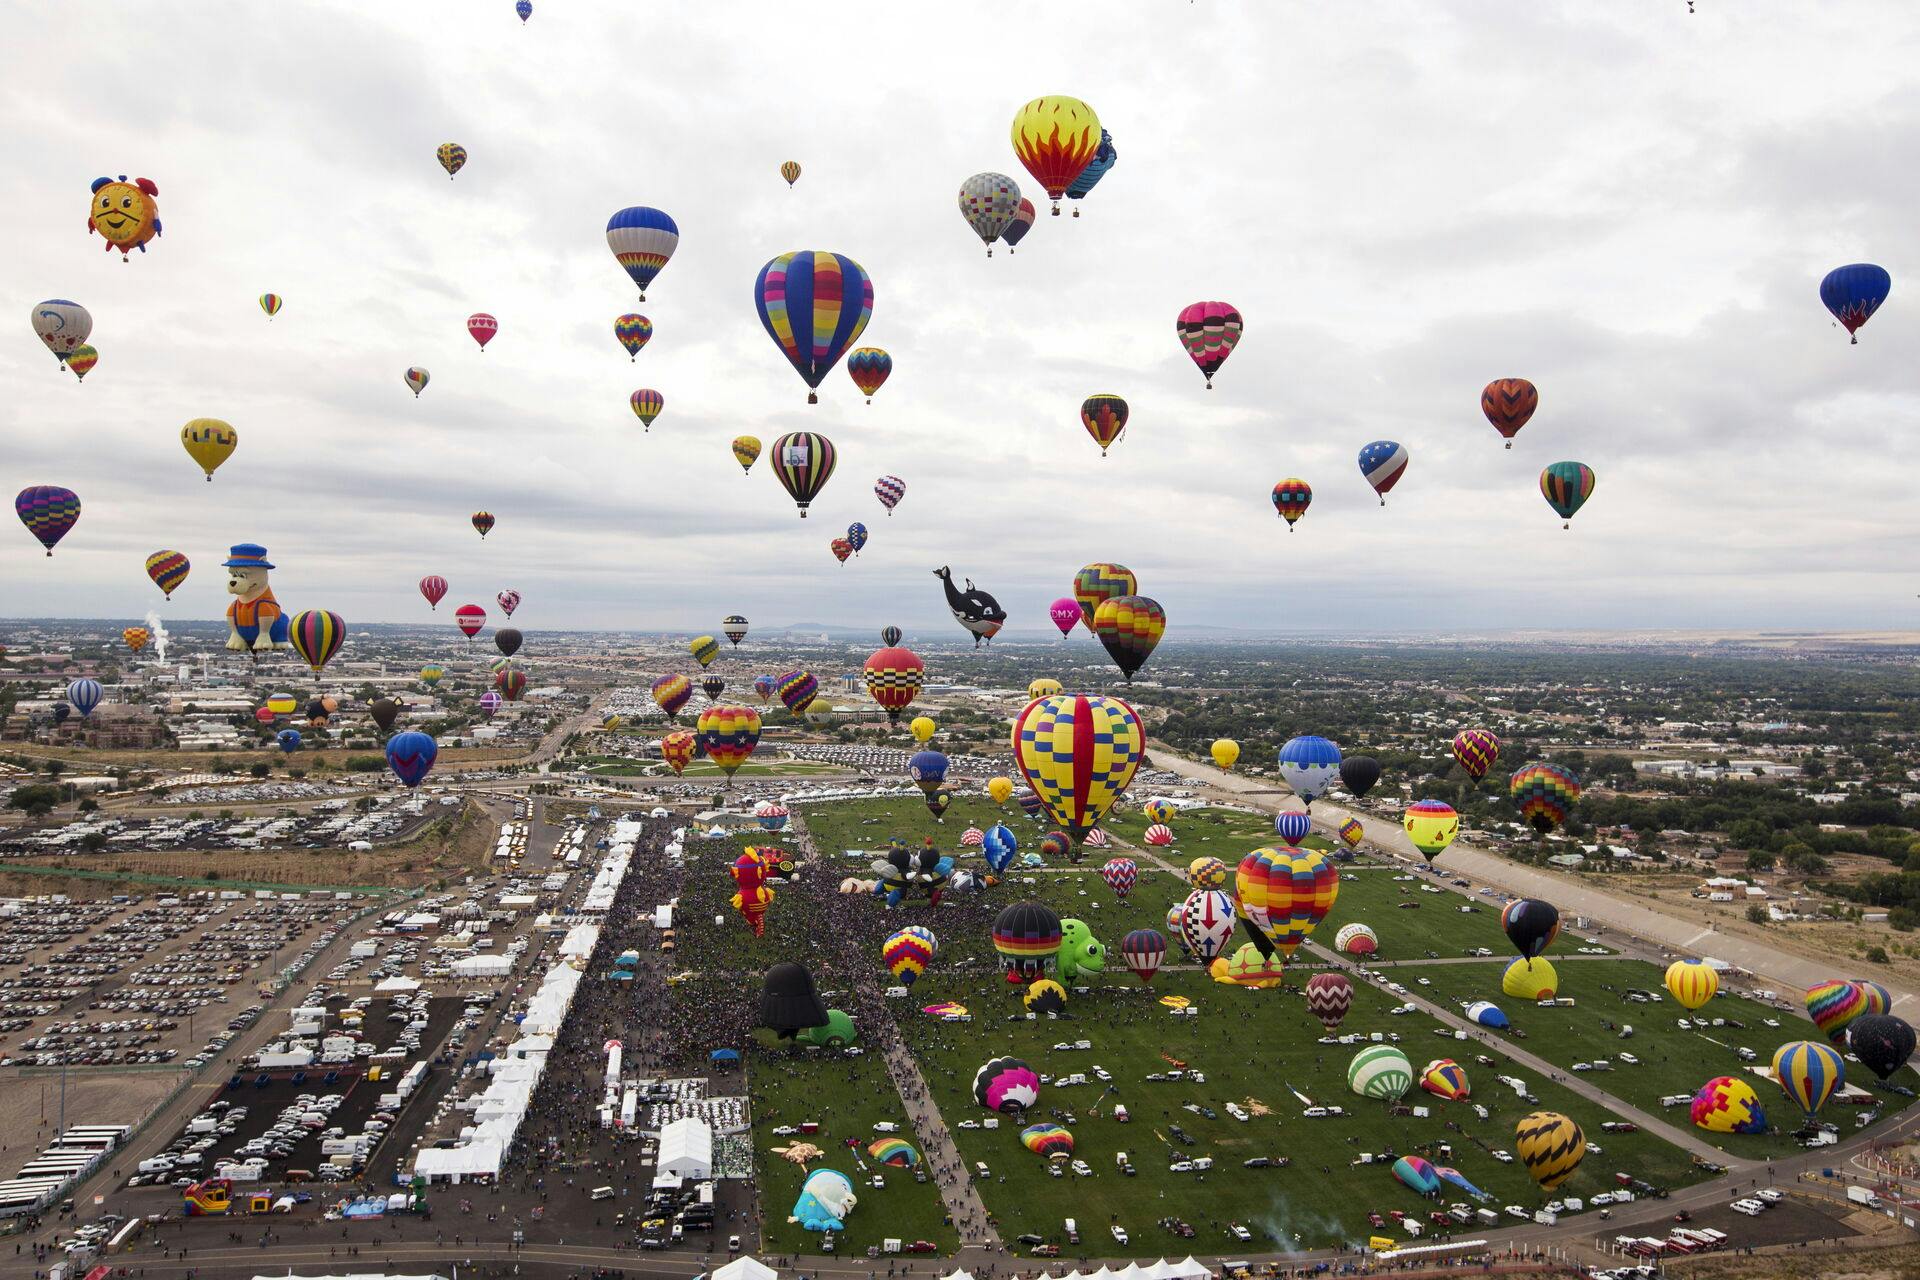 Hundreds of hot air balloons take off during the 2015 Albuquerque International Balloon Fiesta in Albuquerque, New Mexico, October 4, 2015. REUTERS/Lucas Jackson TPX IMAGES OF THE DAY